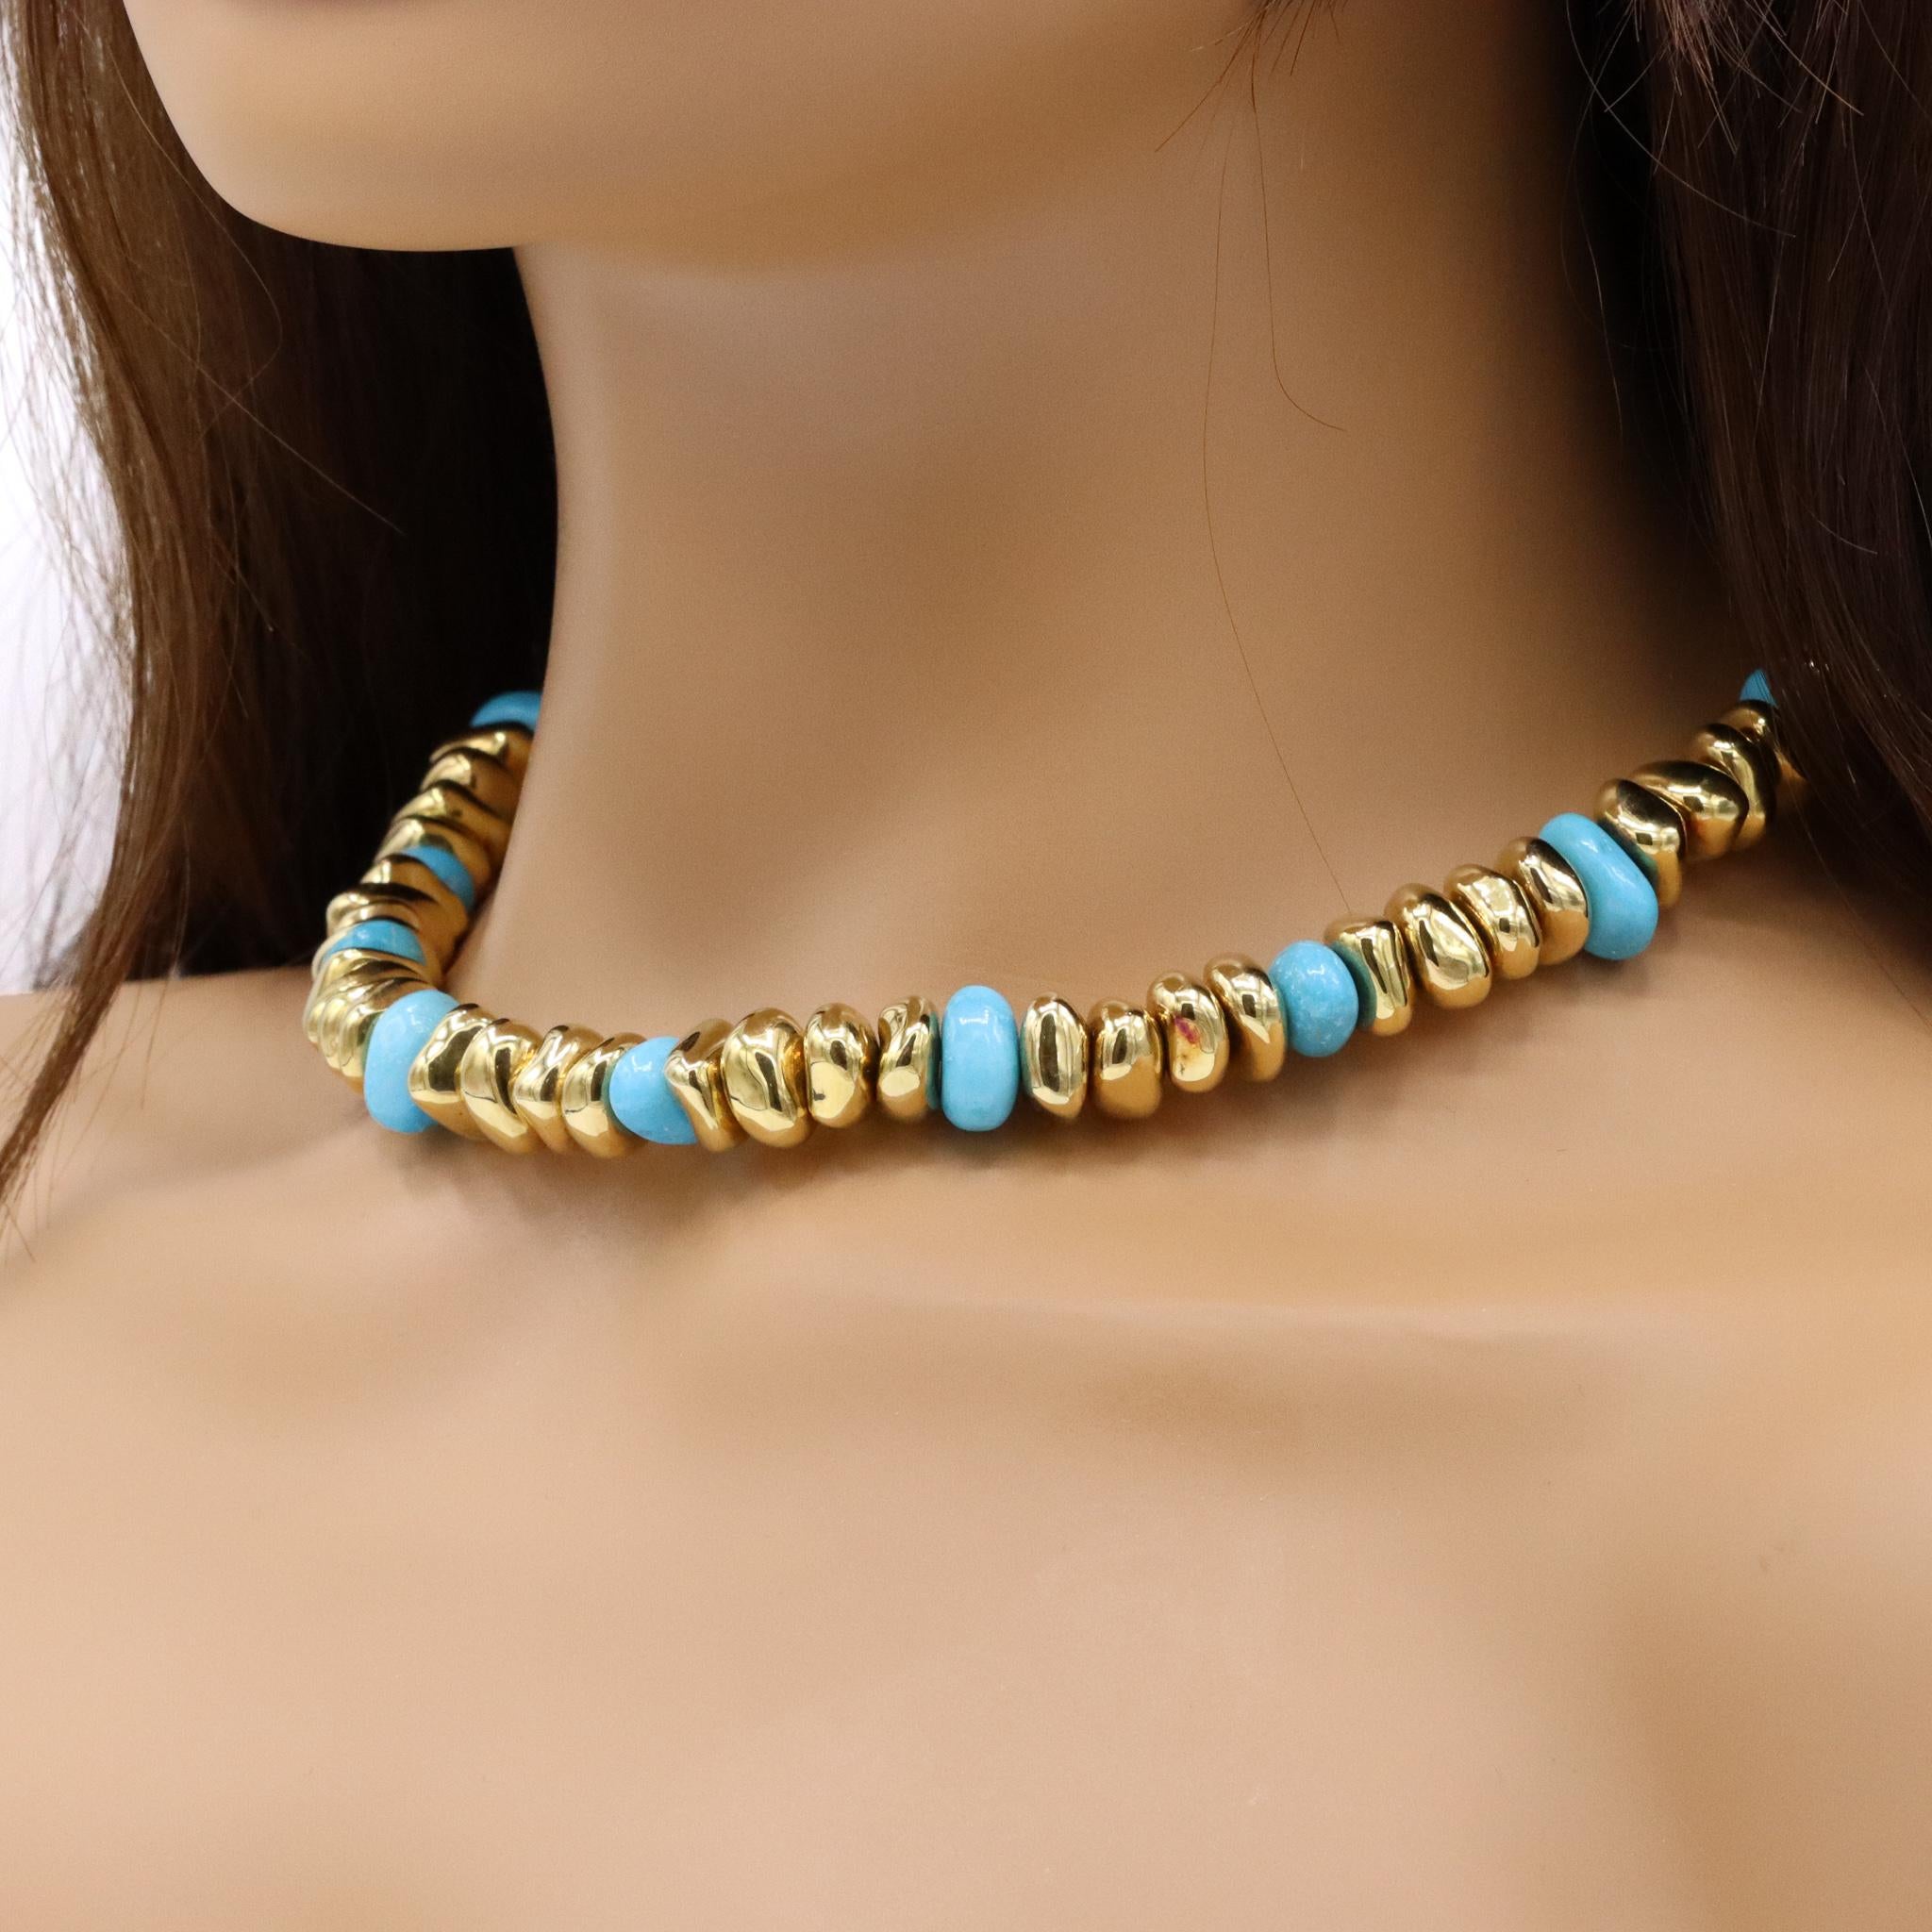 Vintage 18K Gold Beads & Turquoise Choker Necklace 1